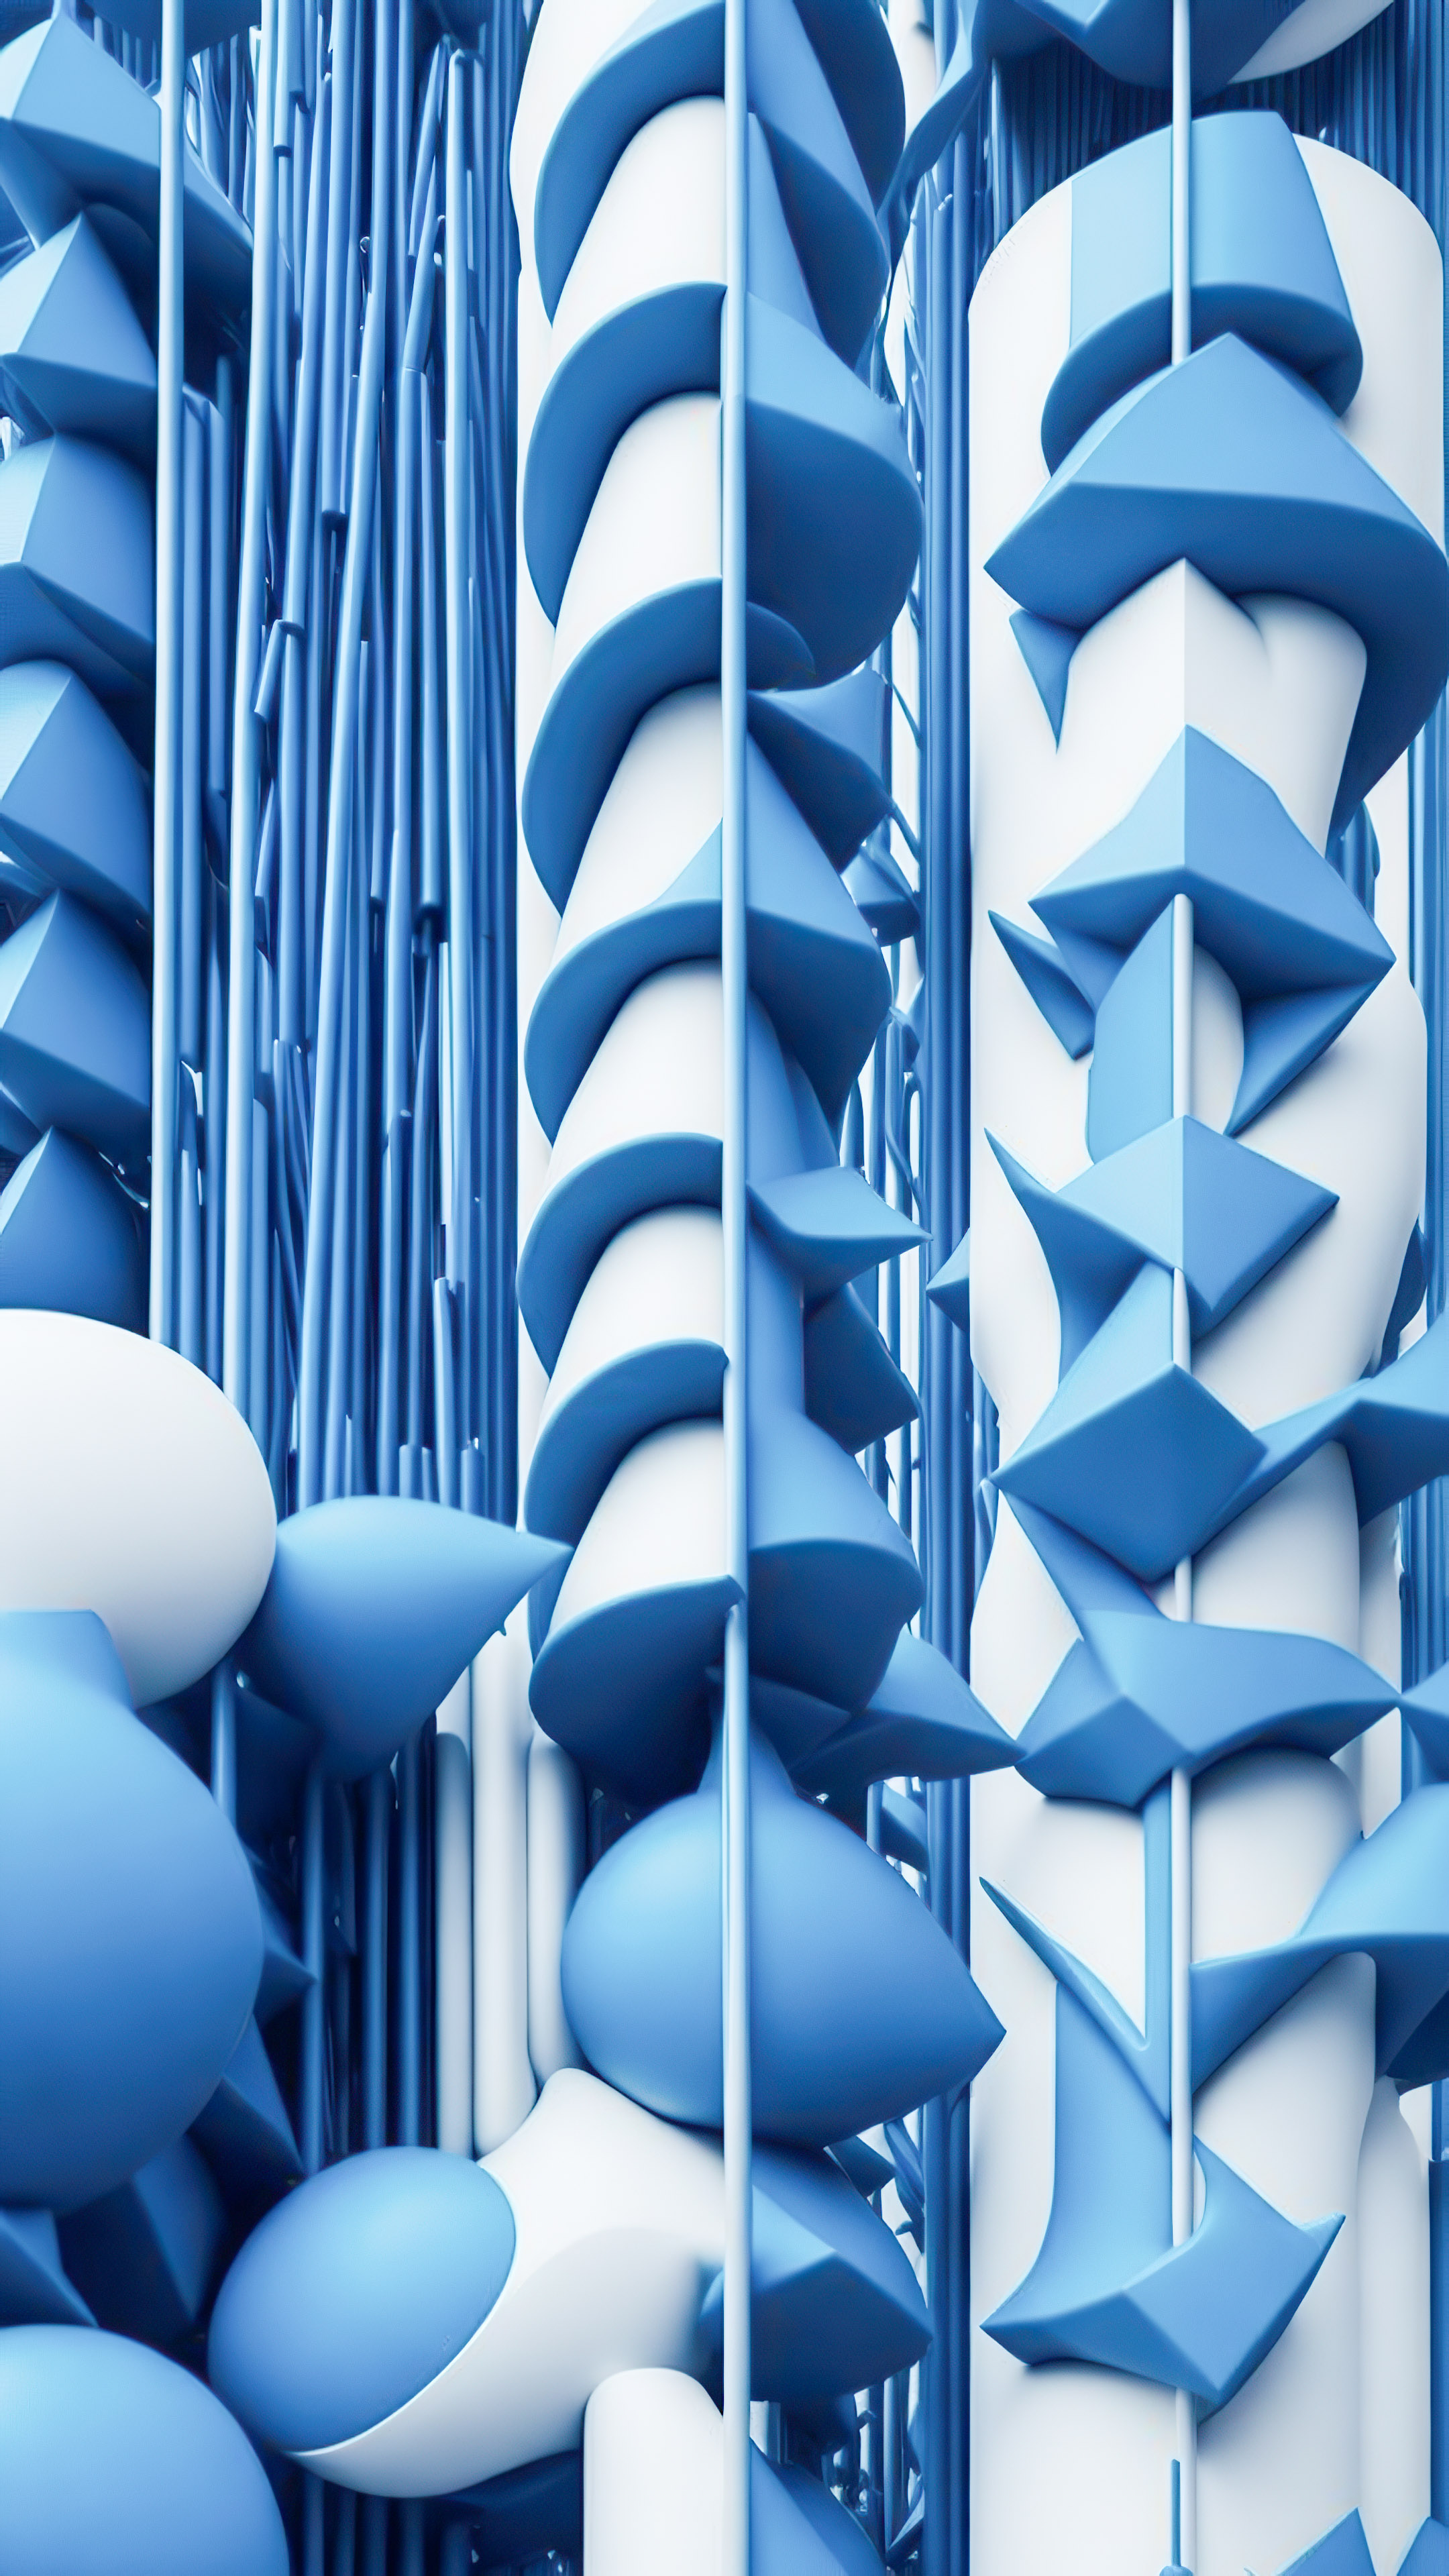 Adorn your device with an arrangement of blue poles in our abstract blue iPhone wallpaper.